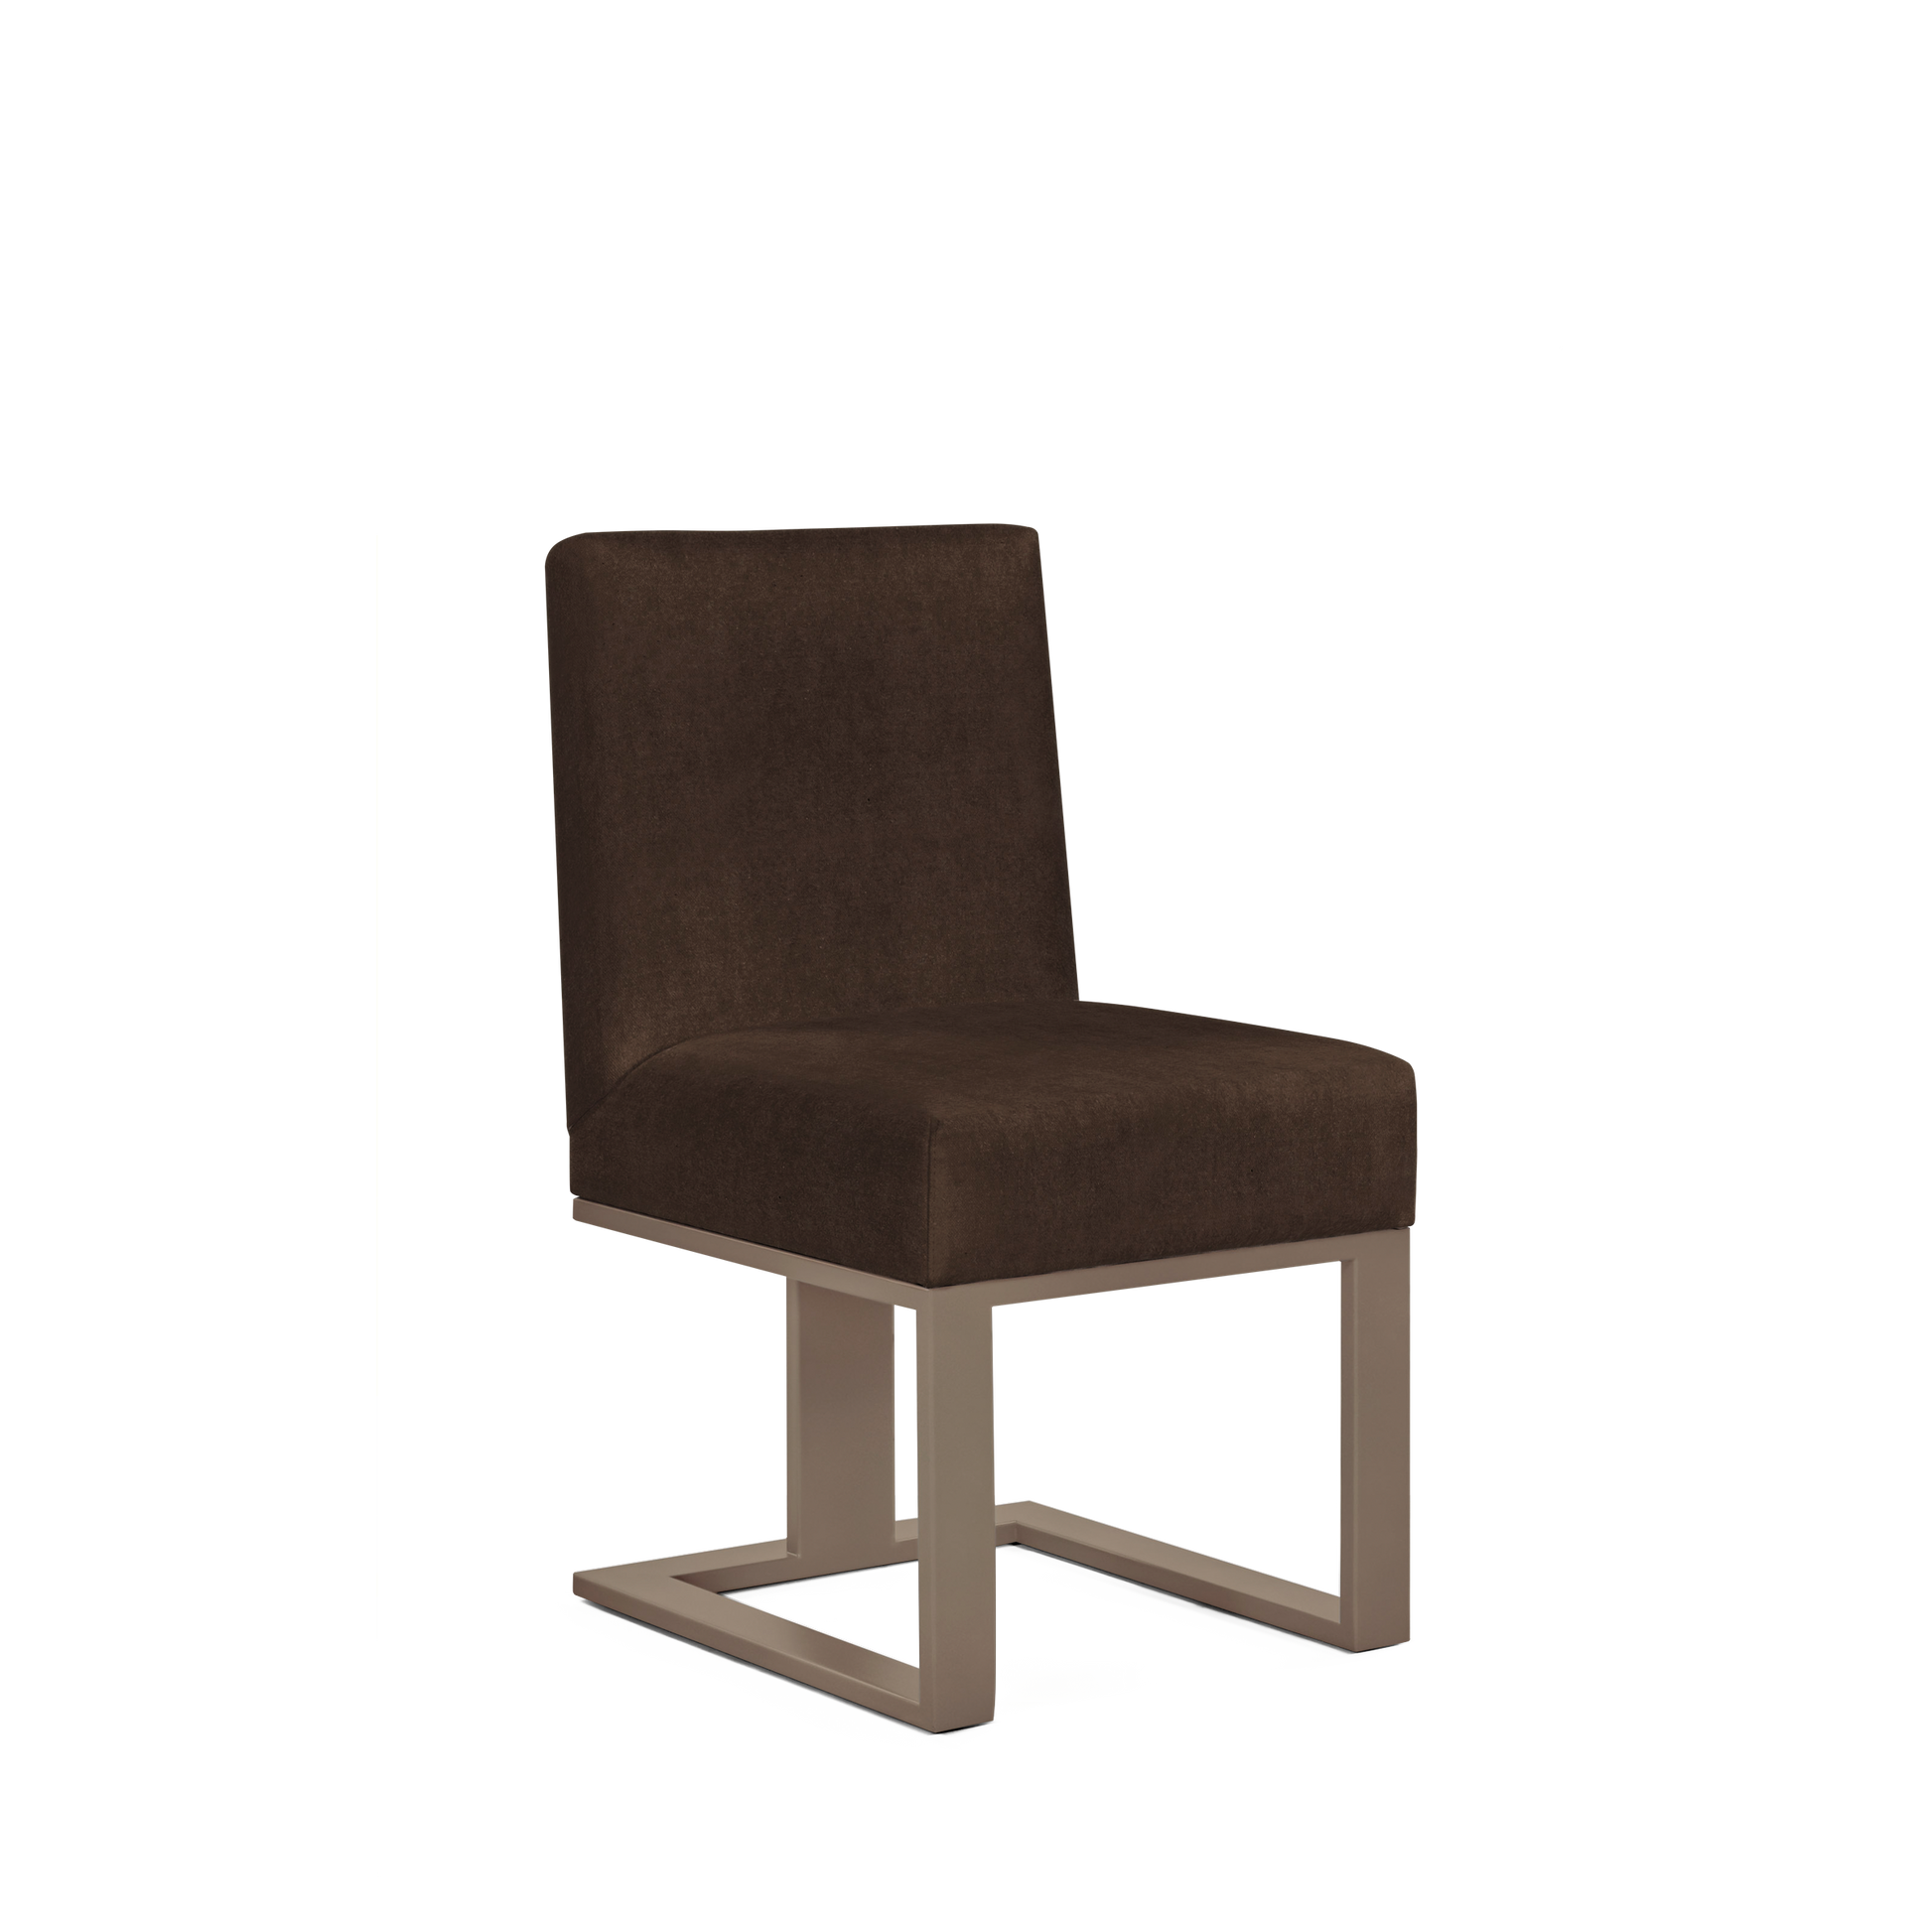 Len chair with suede brown textile and champagne wood legs 